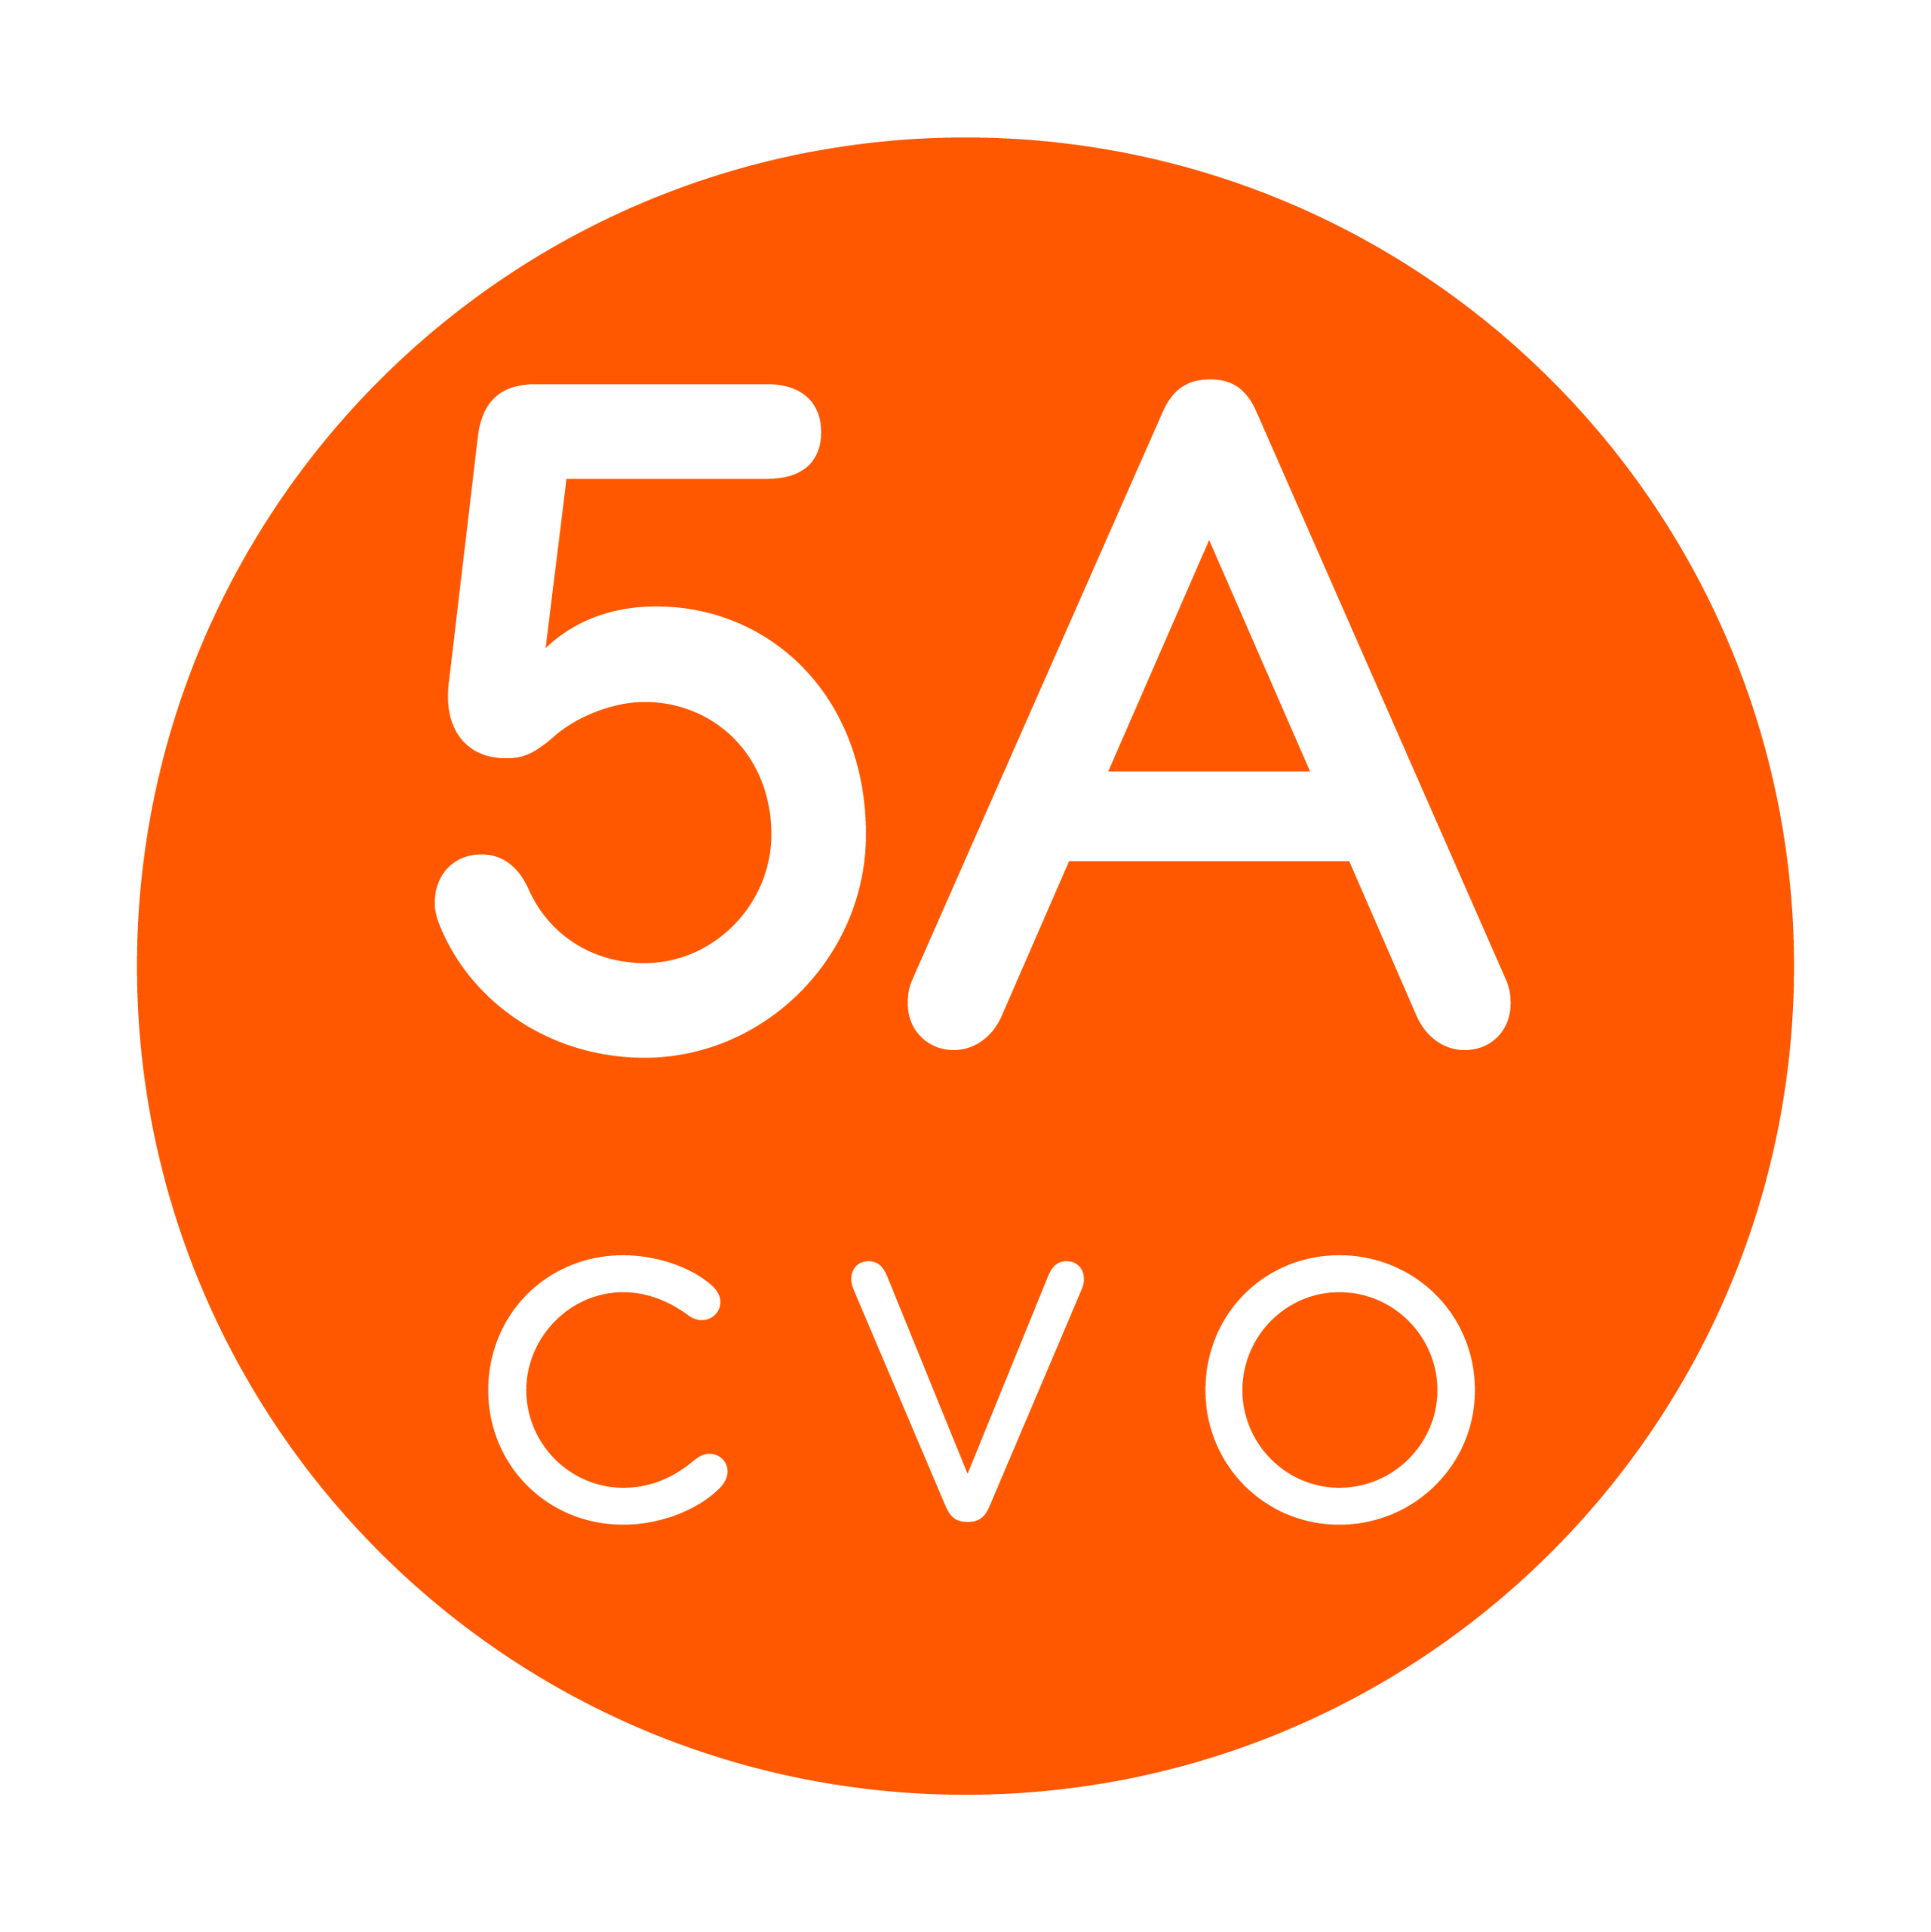 Picture of 5ACVO.com